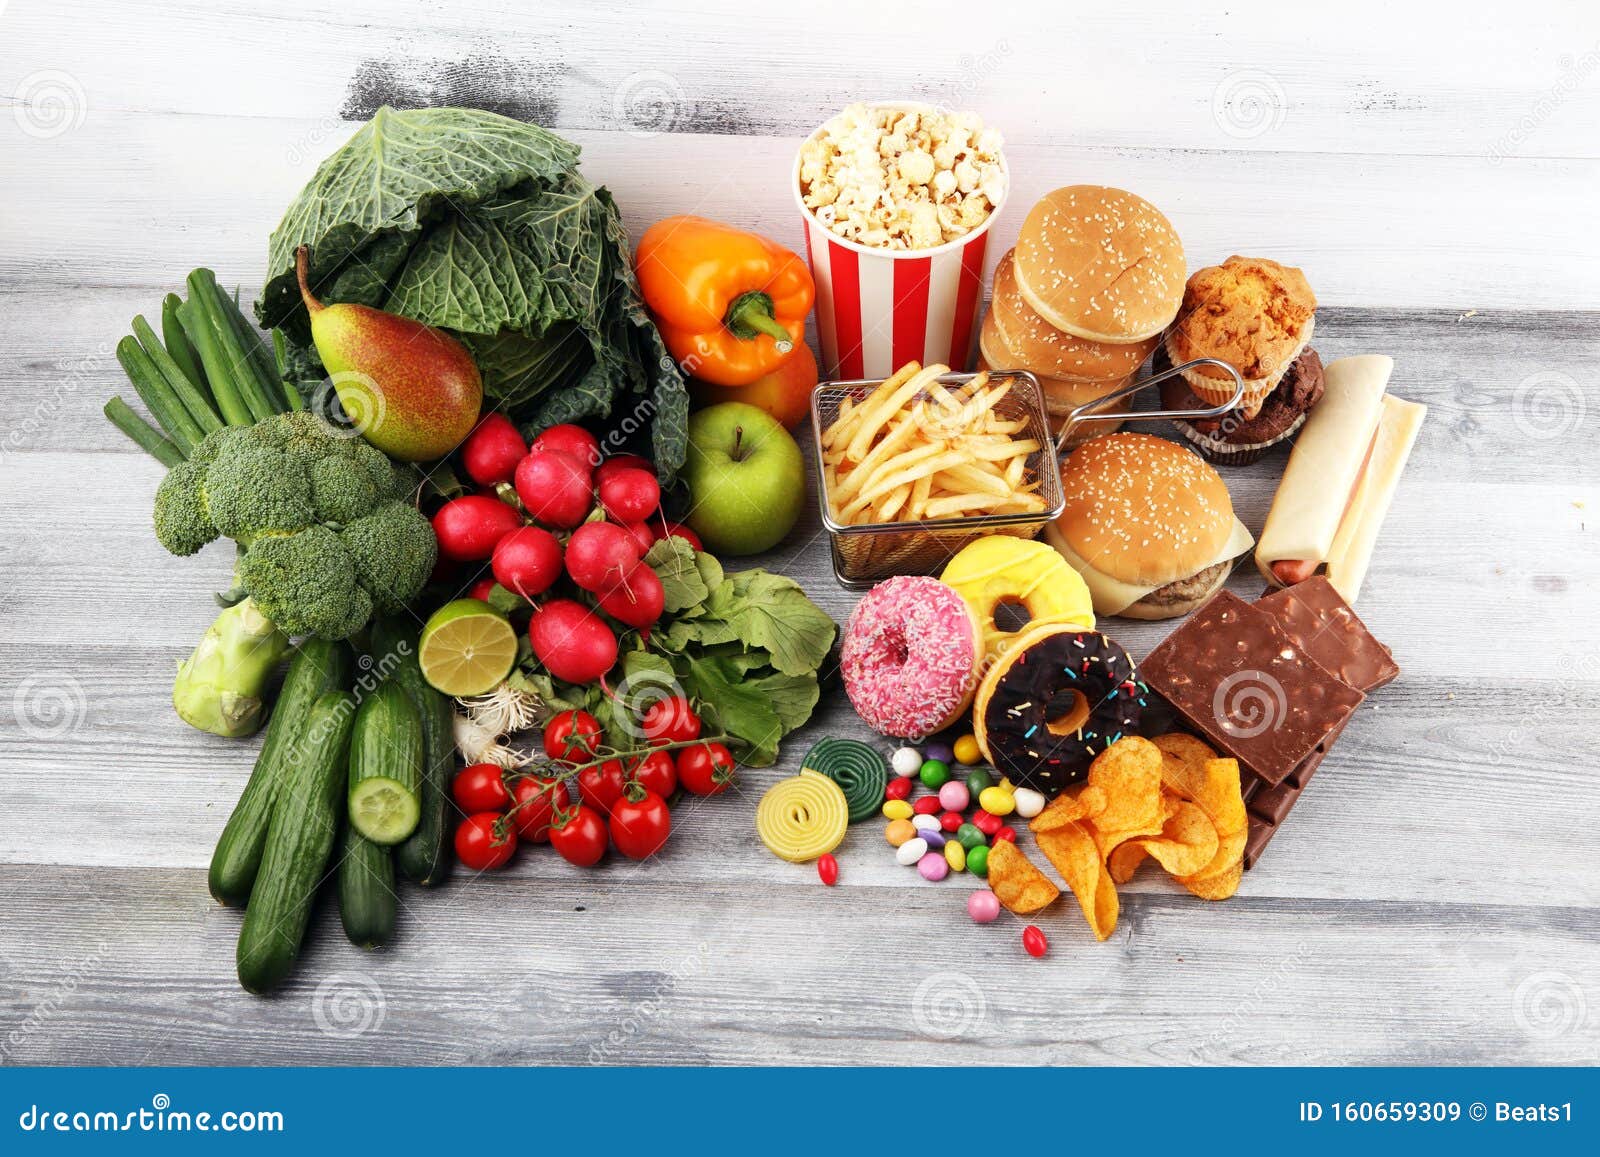 healthy or unhealthy food. concept photo of healthy and unhealthy food. fruits and vegetables vs donuts and fast food